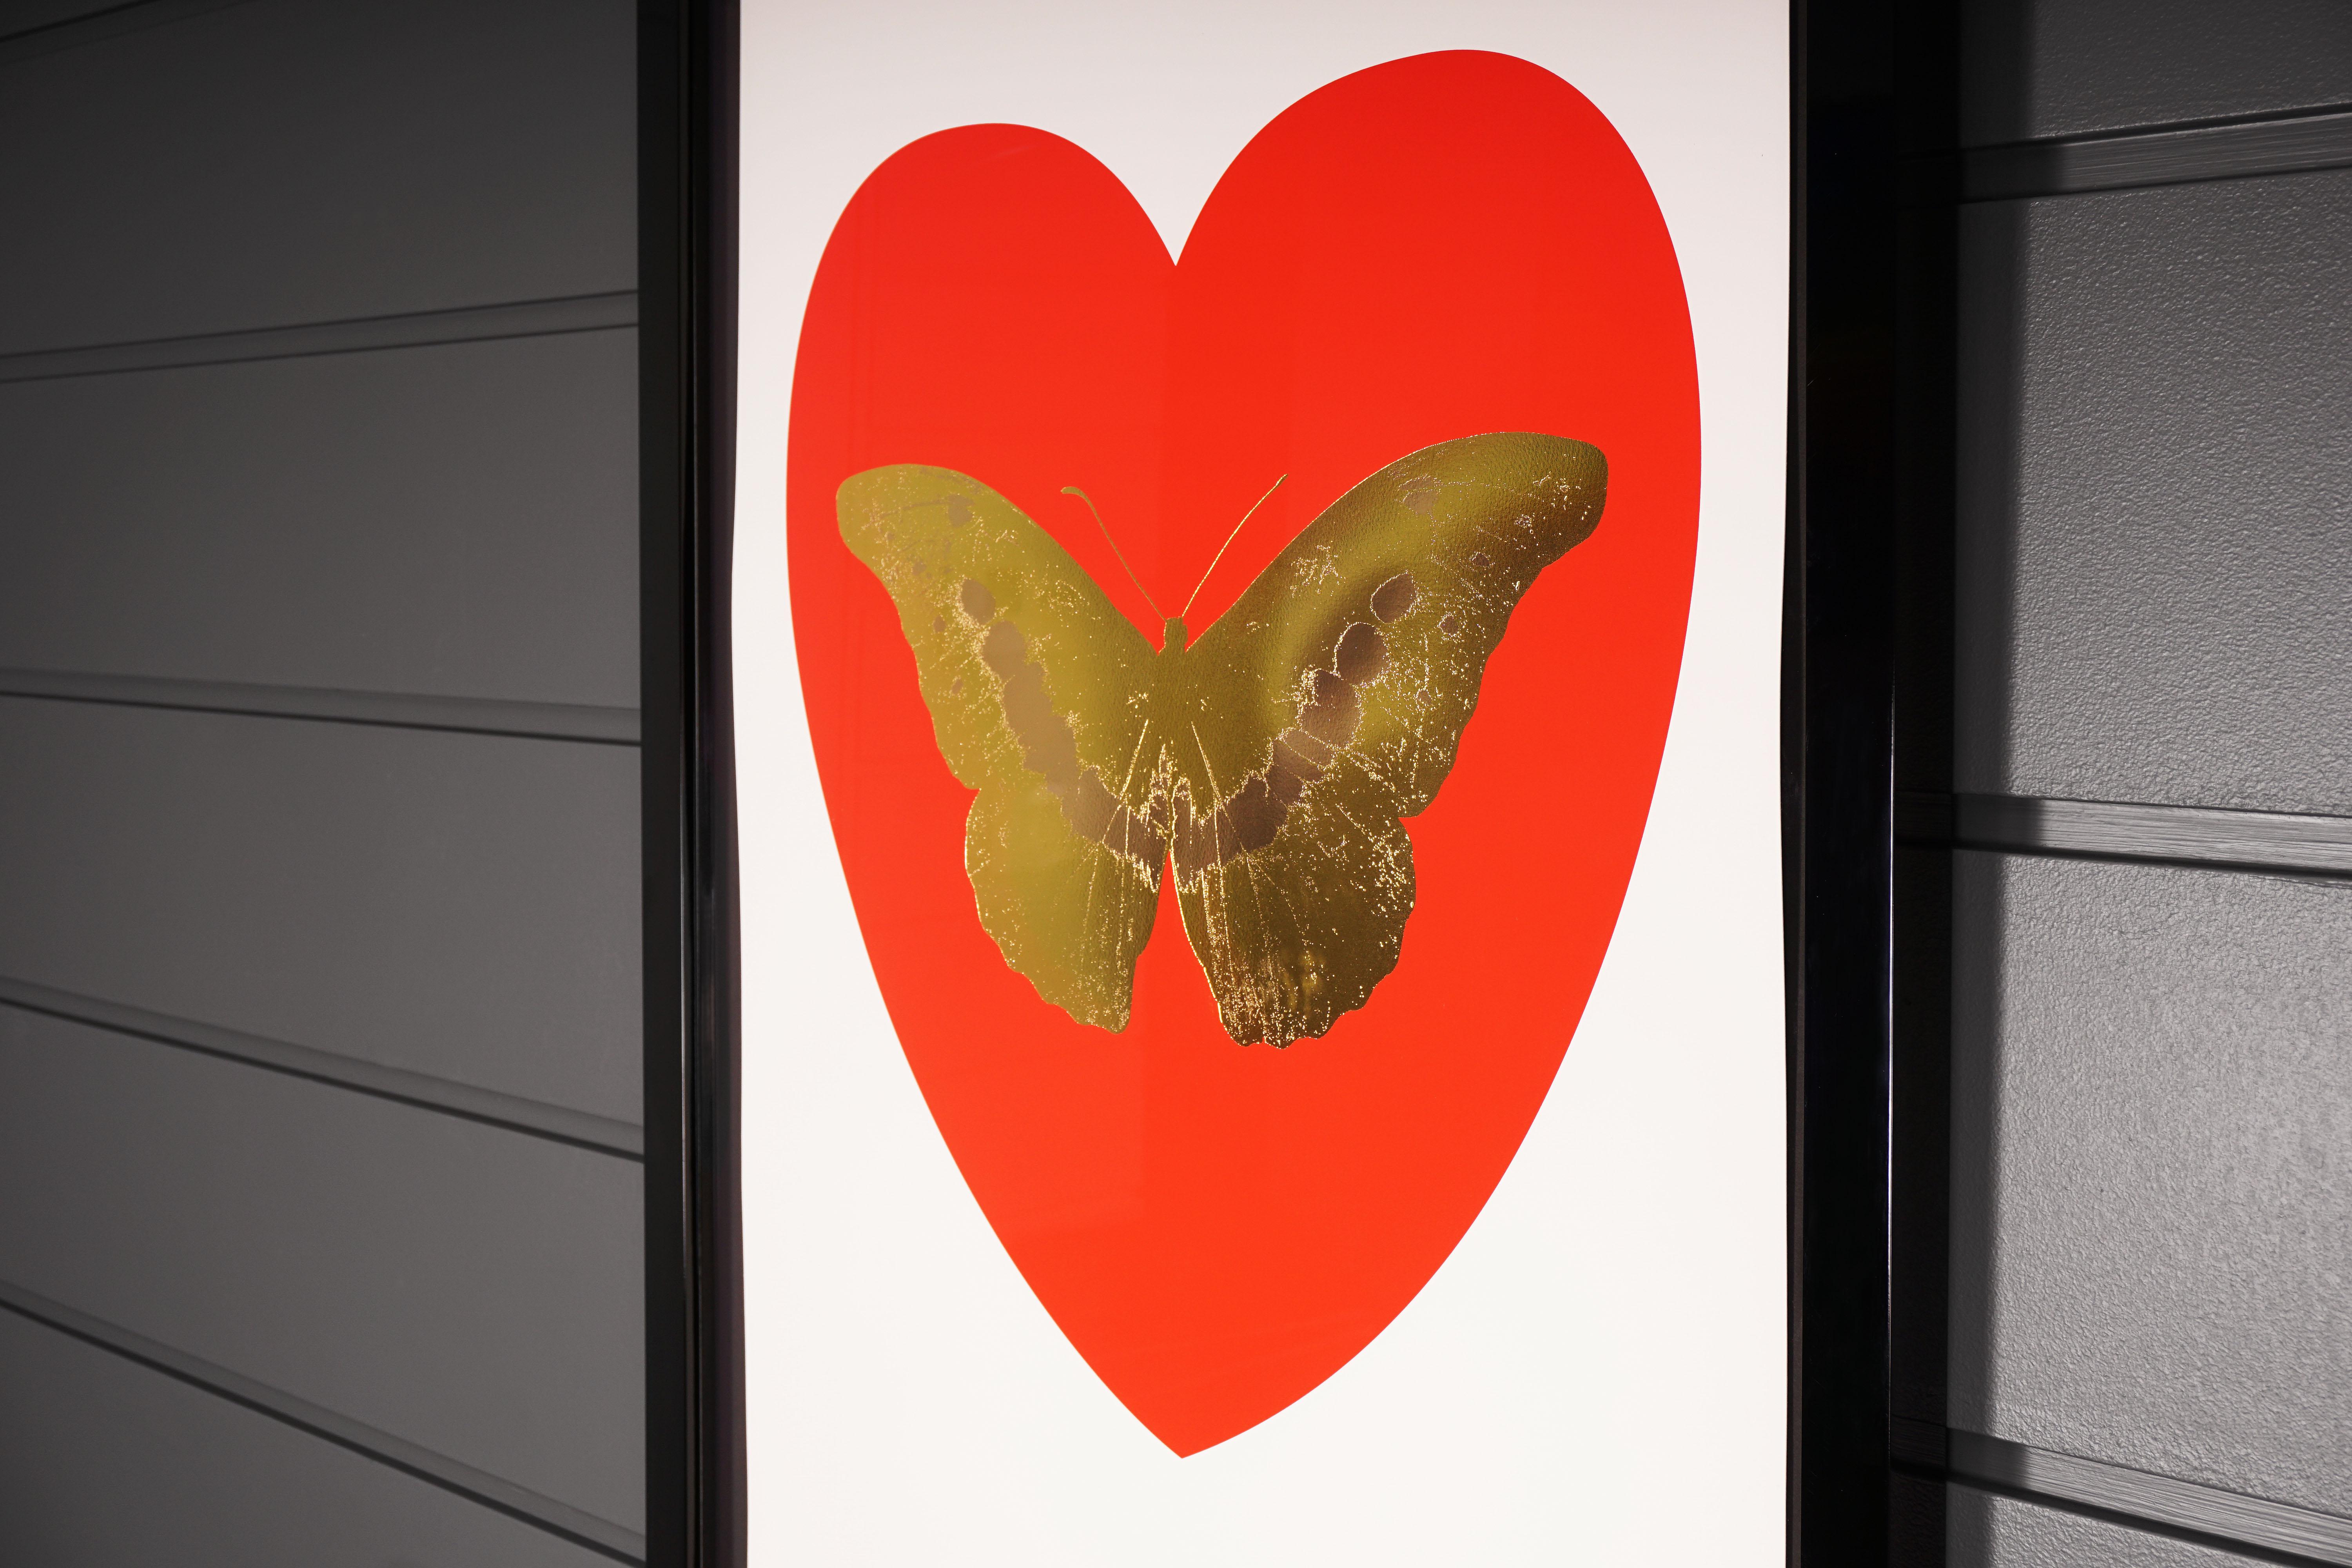 This Artwork is a part of the limited edition series 'I Love You' by Damien Hirst. Created in Hirst's signature style using butterflies as a symbolism for the celebration of life. This particular work features a foil-block butterfly surrounded by a